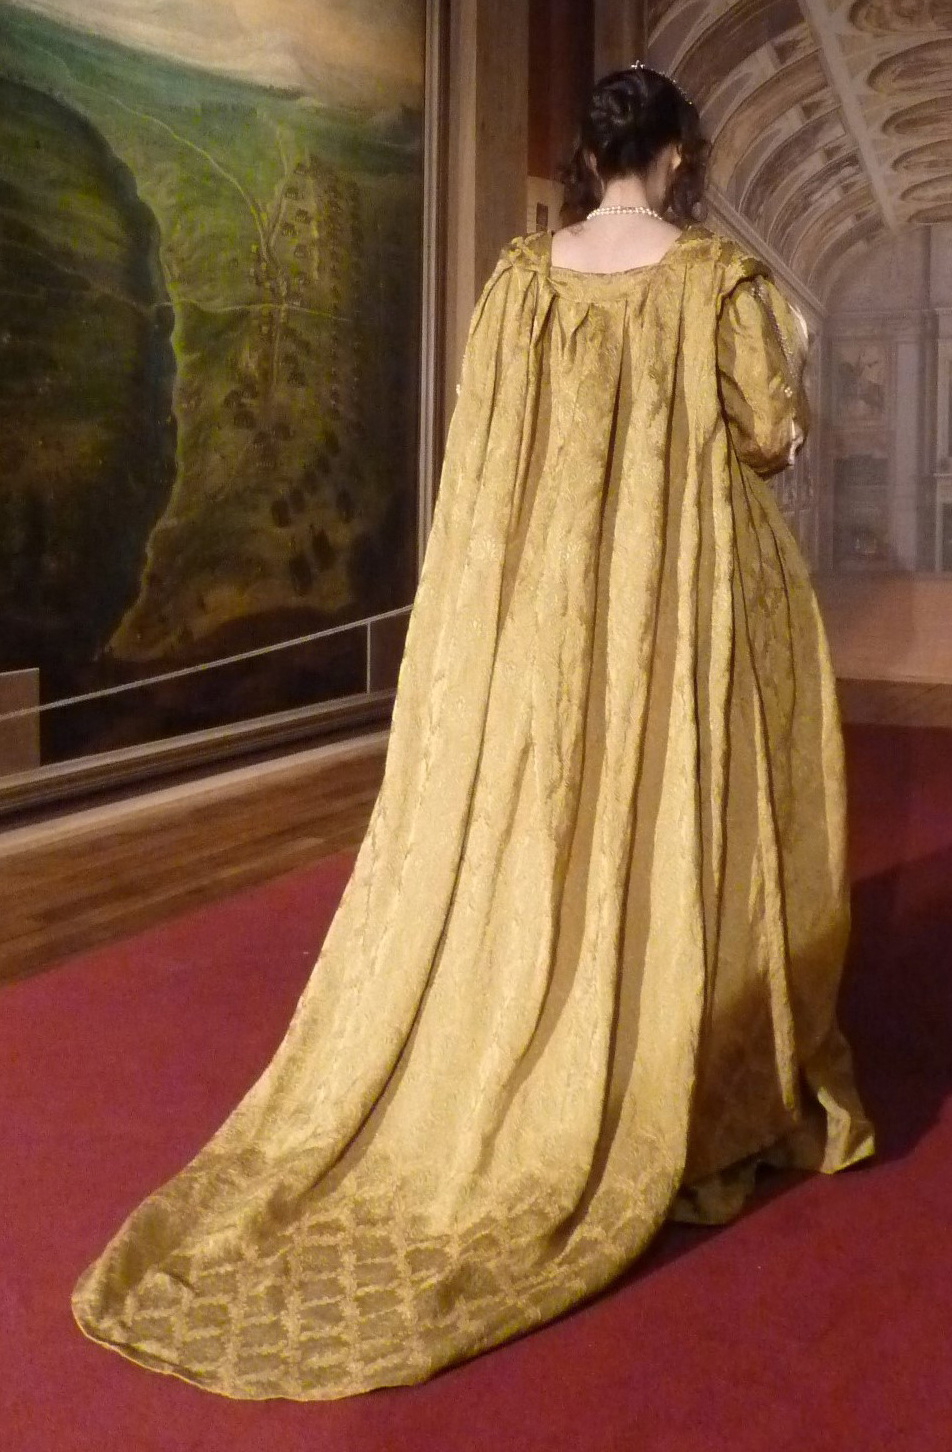 Detail of the Anne of Austria’s costume